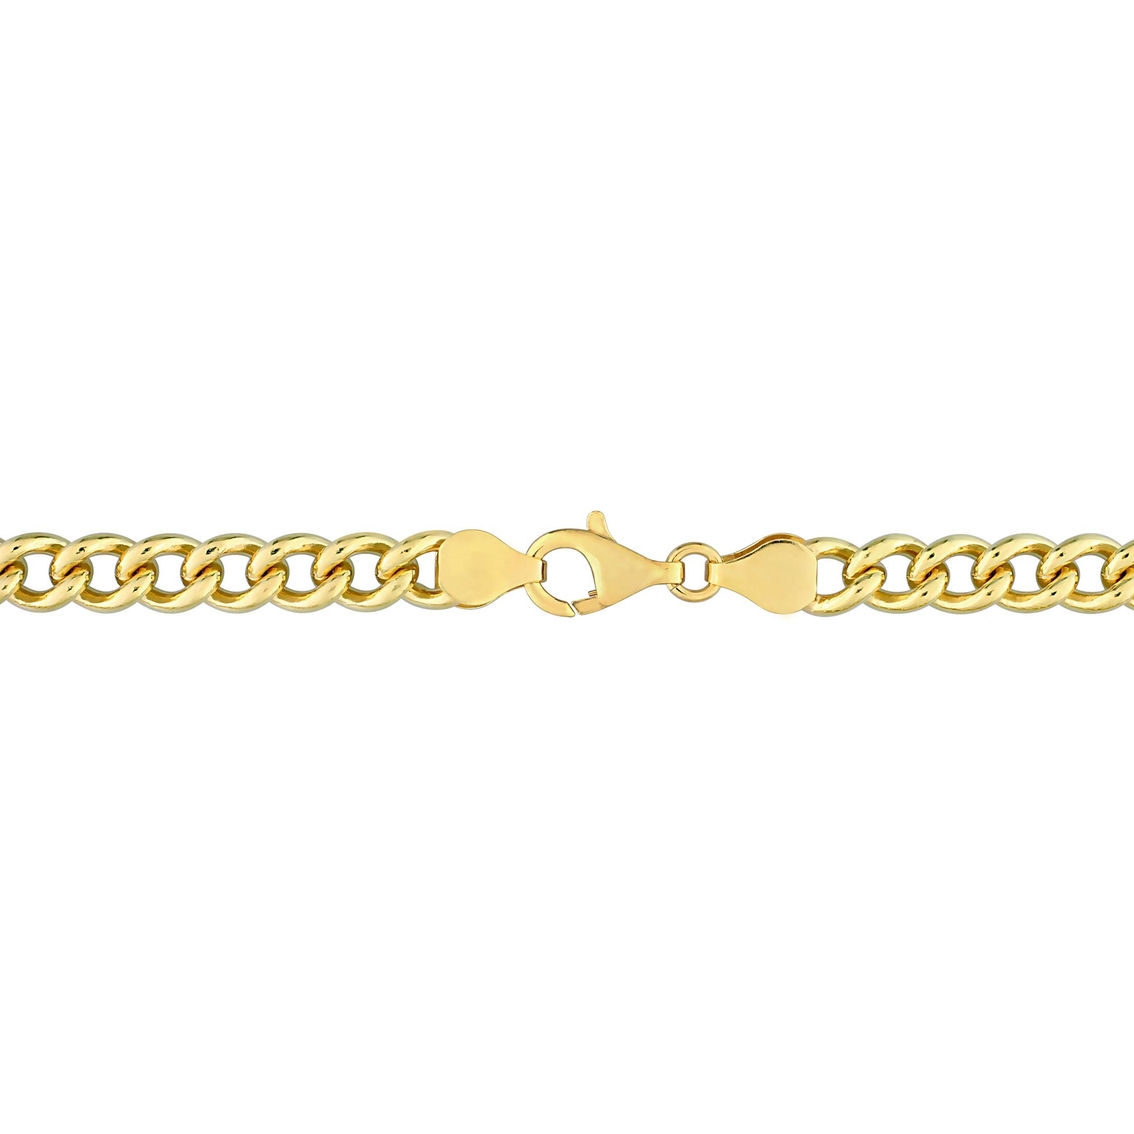 Sofia B. 18K Gold Plated Sterling Silver 6.5mm Curb Link Chain Necklace - Image 2 of 3